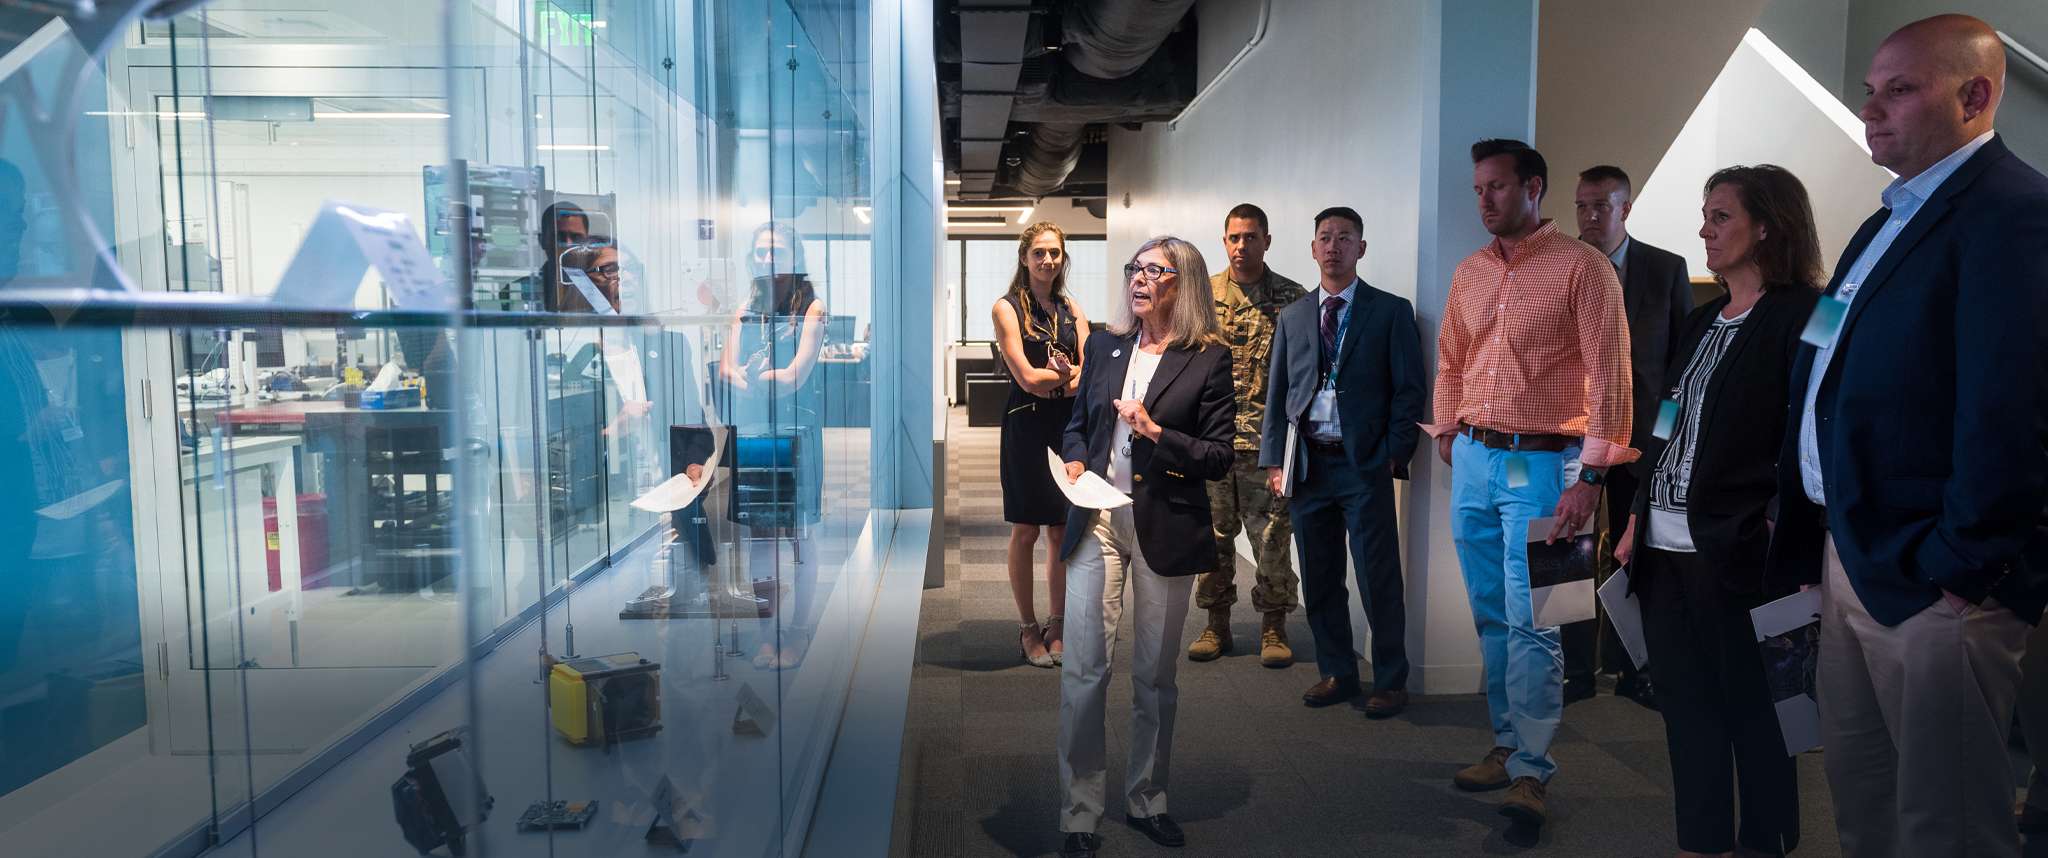 Distinguished guests, including members of the Congressional staff and Space Systems Command, visit the Aerospace campus for a guided tour of our state-of-the-art facilities.